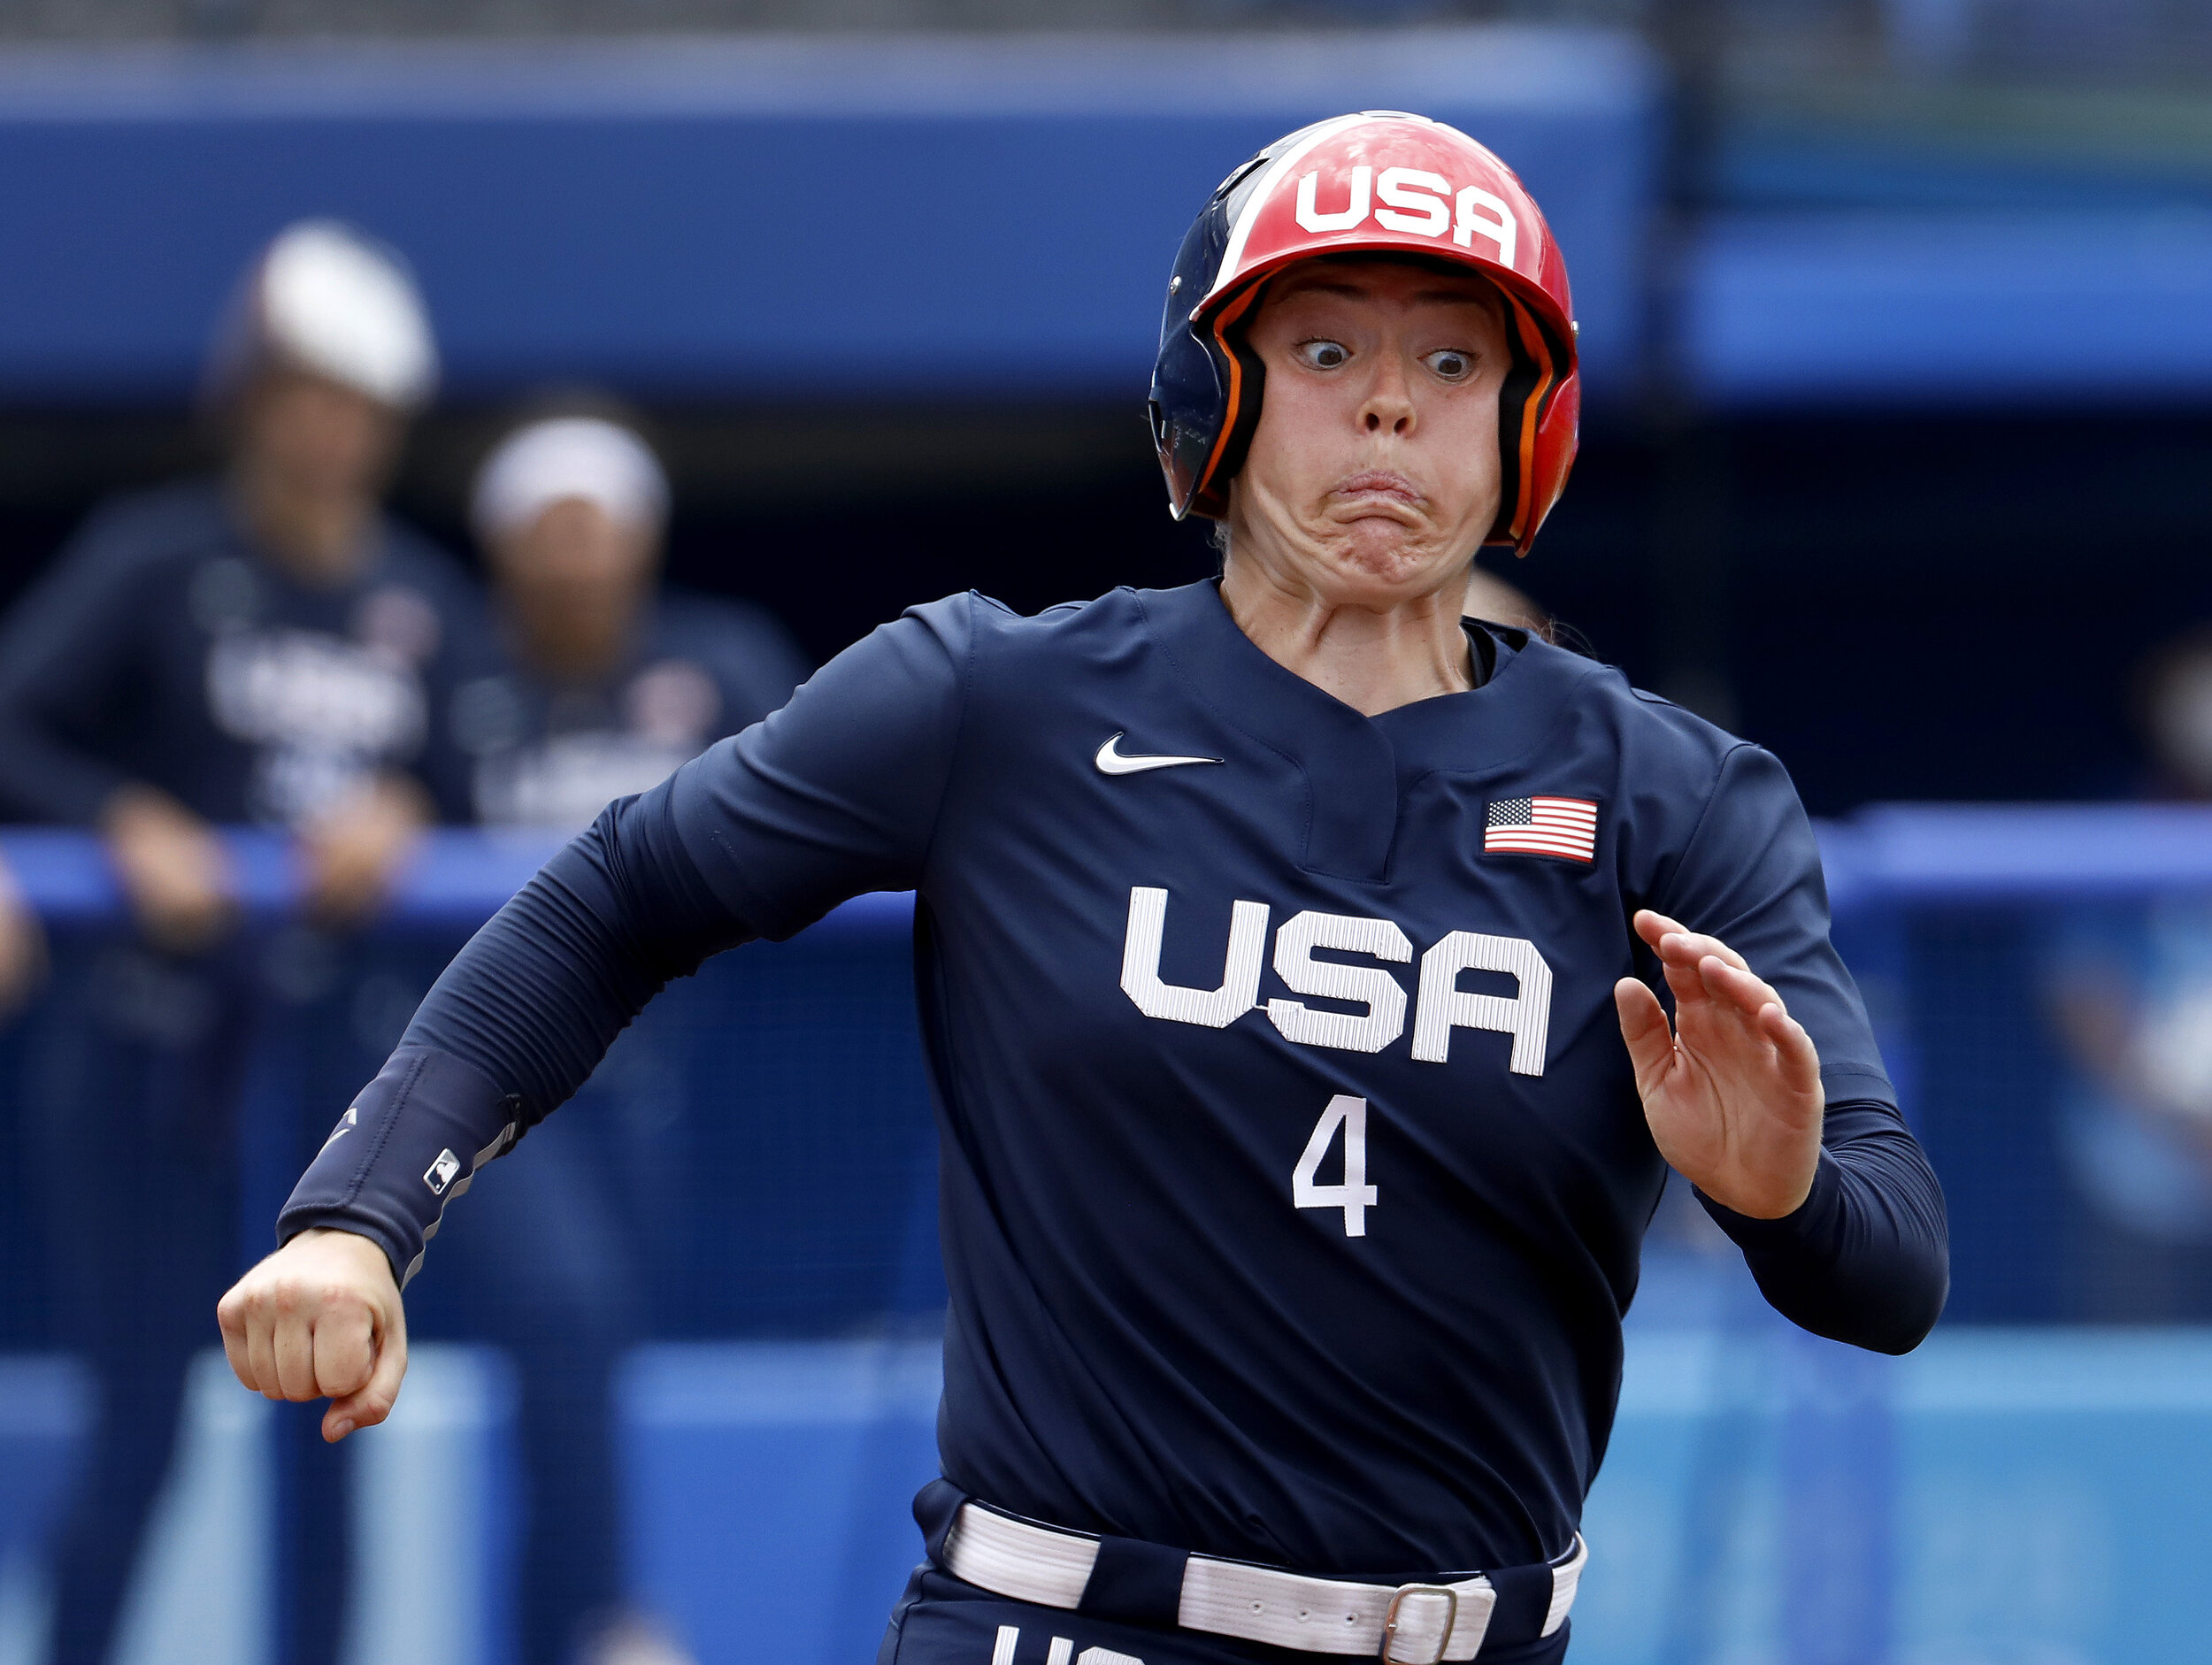  U.S. softball player Amanda Chidester strains as she heads to first base against Japan during the Tokyo Olympics. 